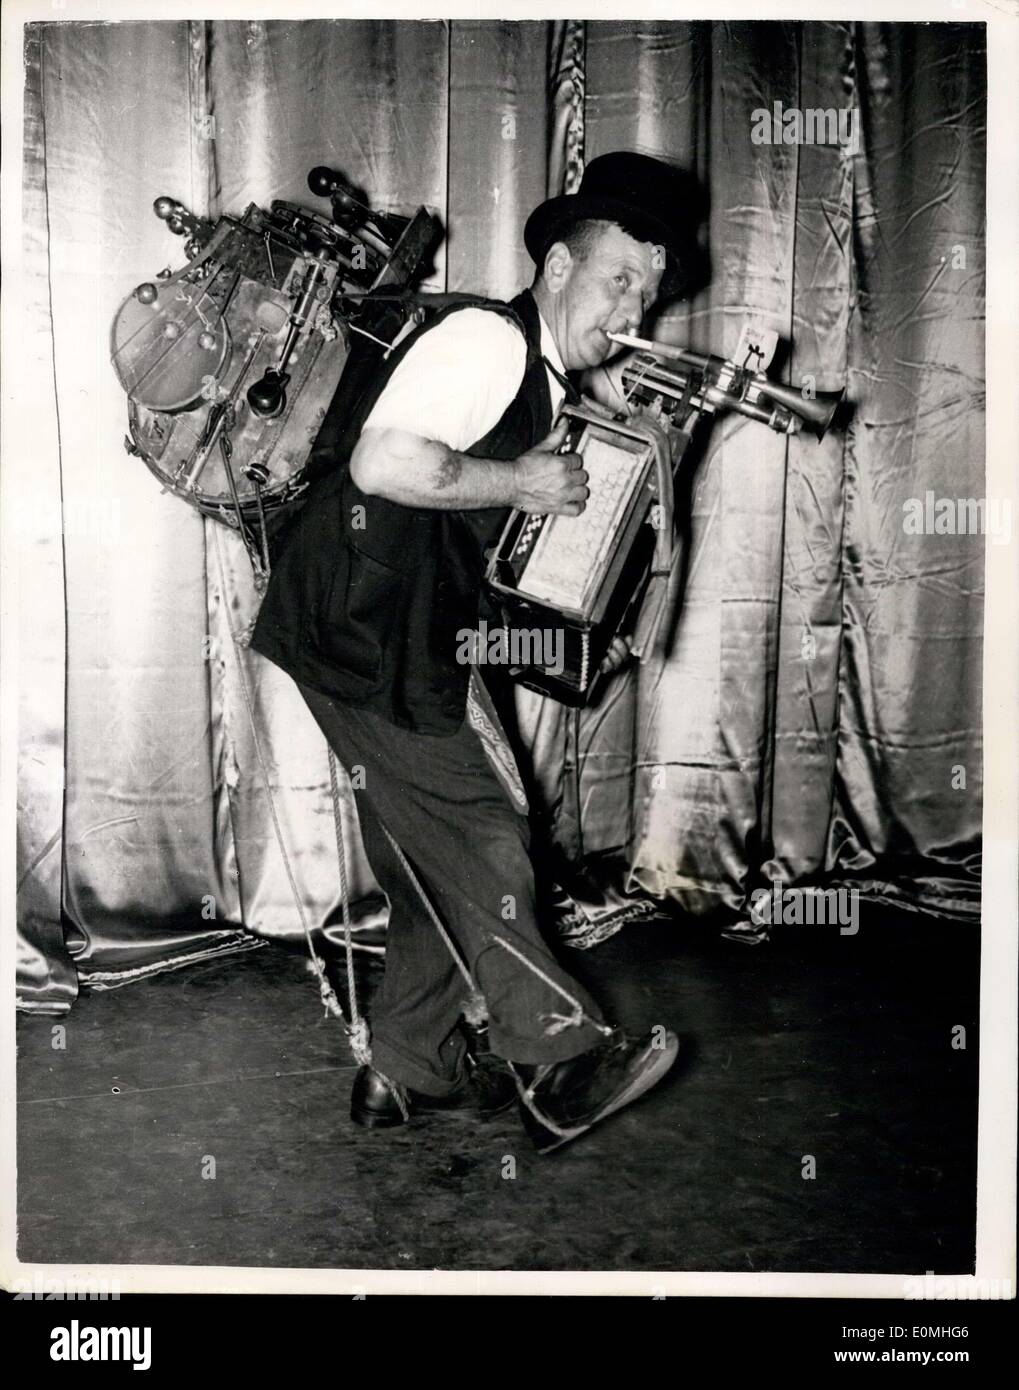 Jul. 28, 1955 - Introducing''Old George'' - The One-Man-Band..A Television Star of the Future?: One of the most popular of the many 'Buskers' to be seen outside the Theatres of the West End of London these days is Old George Wilson who operates a 'One-Man-Band'- in which he plays practically everything but the 'Kitchen sink'..with the Big Drum on his back connected to cymbals-triangles-small drums and many other items with varying tones - and to the front an accordian and a battery of trumpets - Old George gives a performance second to none. Stock Photo